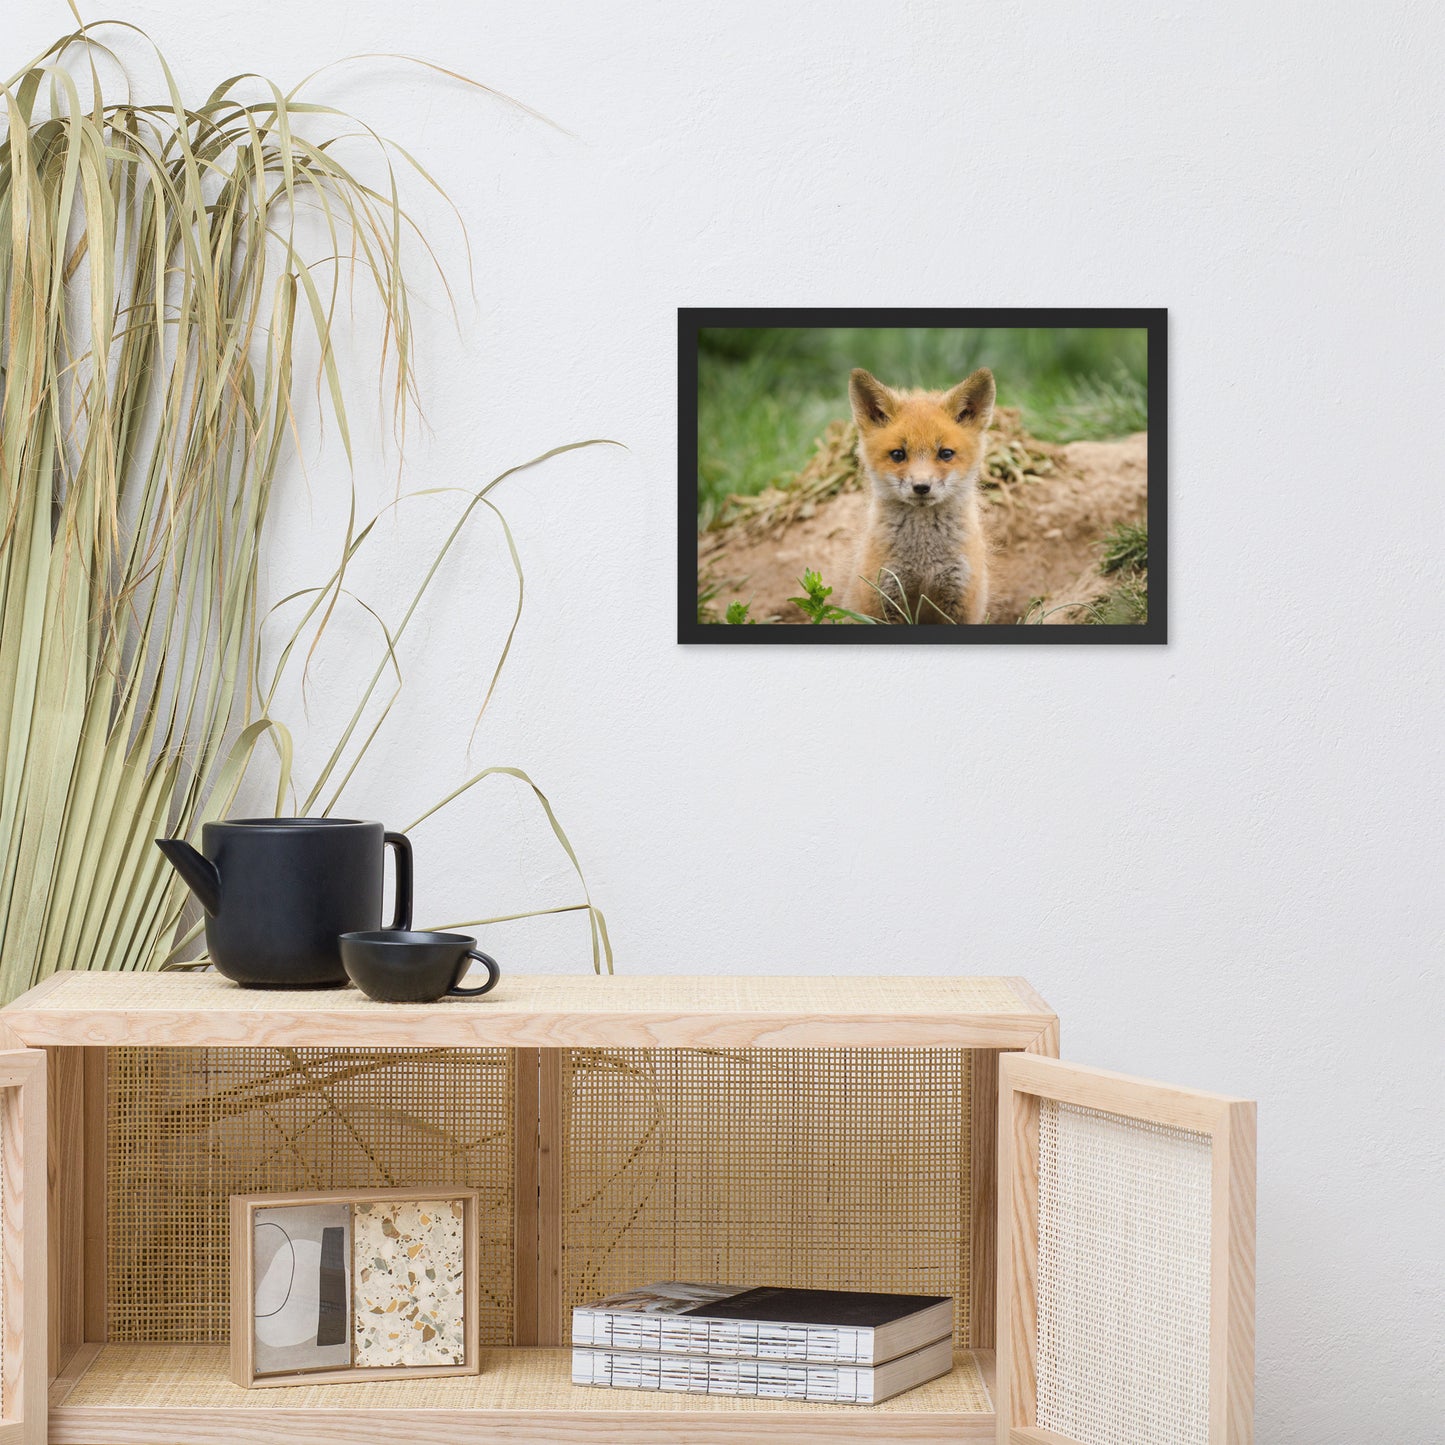 Pictures On Bathroom Walls: Baby Young Red Fox Kit/ Animal / Wildlife / Nature Photographic Artwork - Framed Artwork - Wall Decor